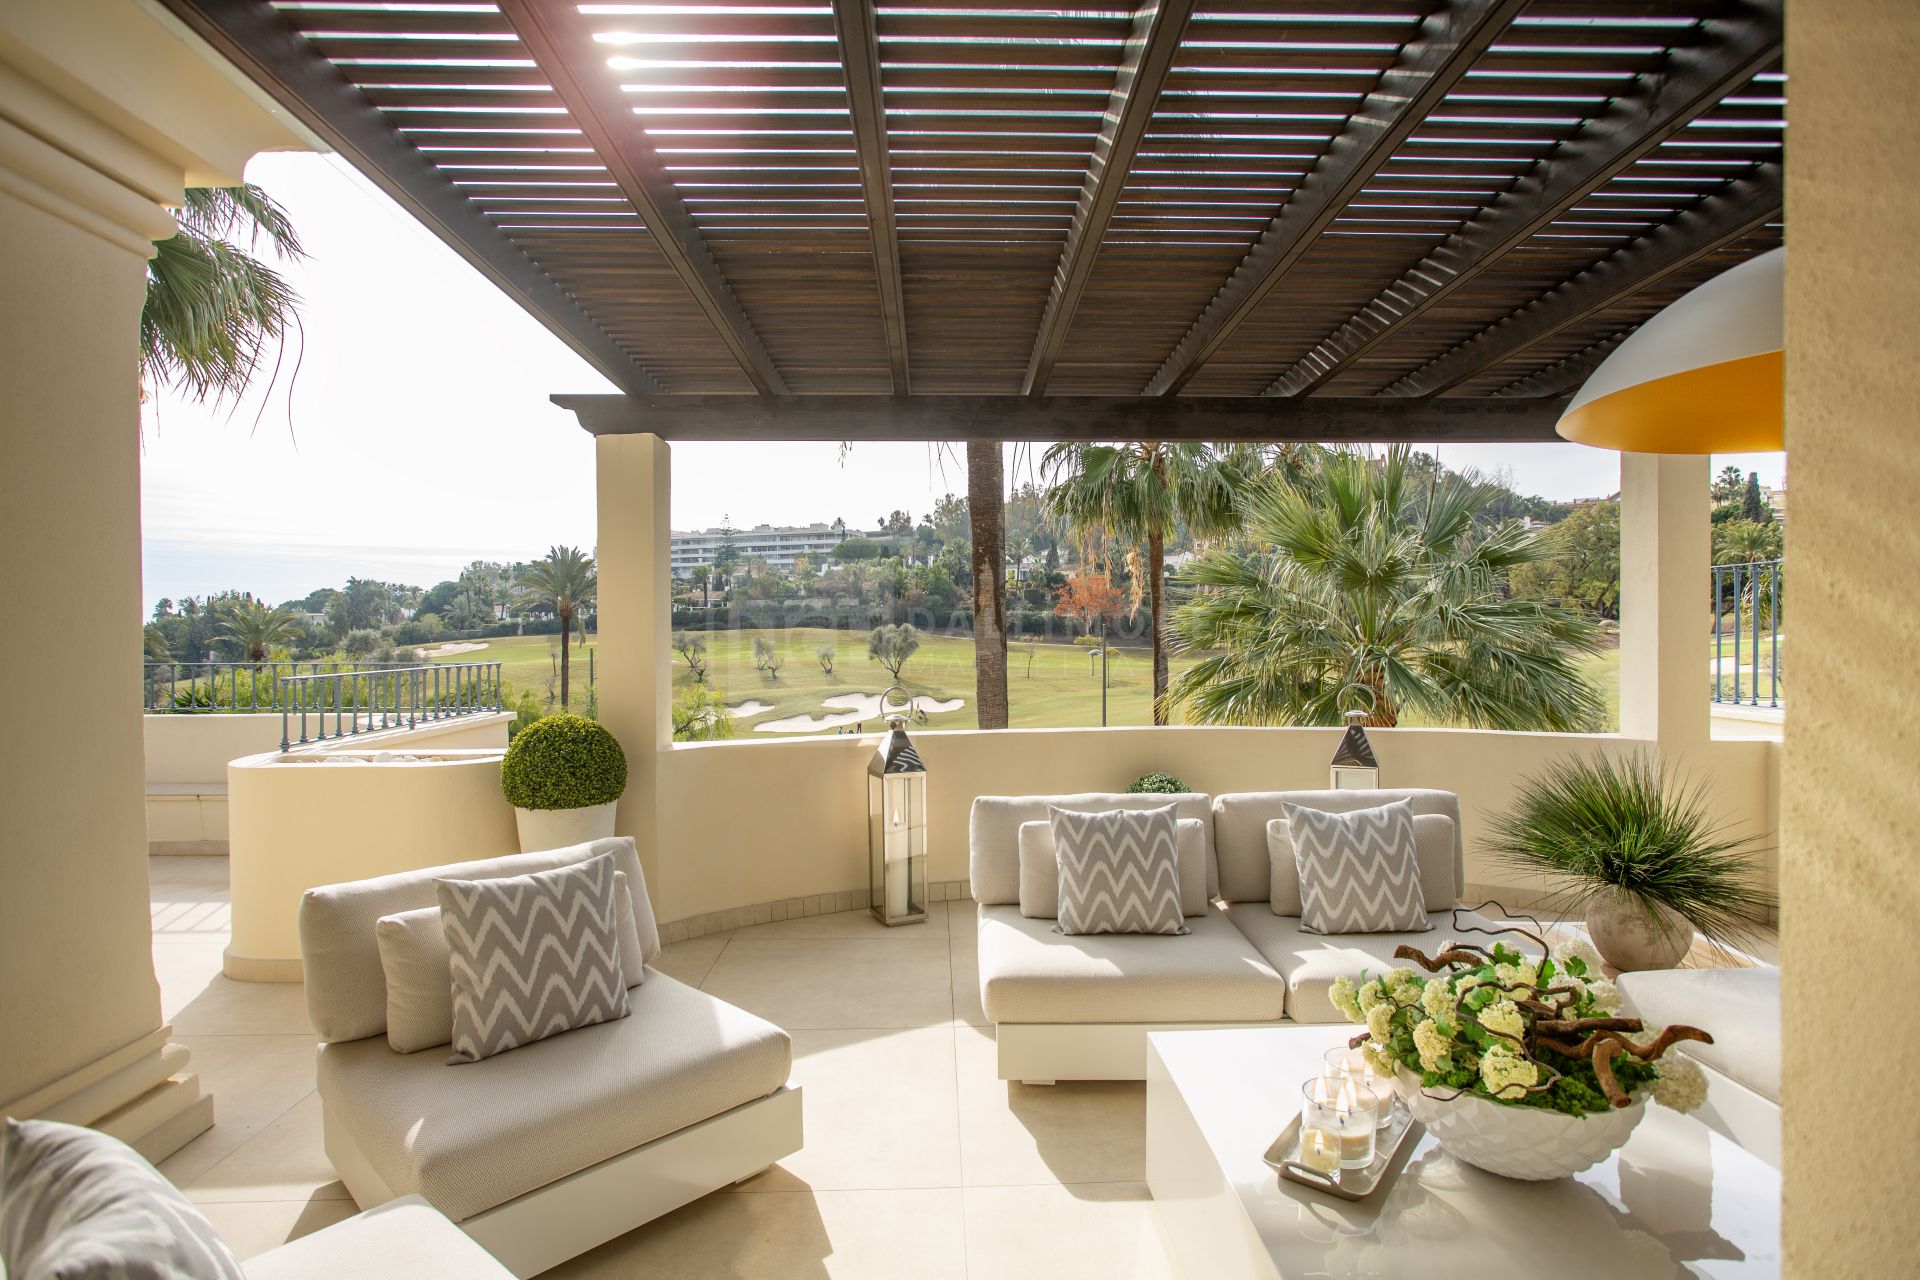 STUNNING DUPLEX PENTHOUSE WITH PRIVATE POOL OVERLOOKING THE GOLF COURSE